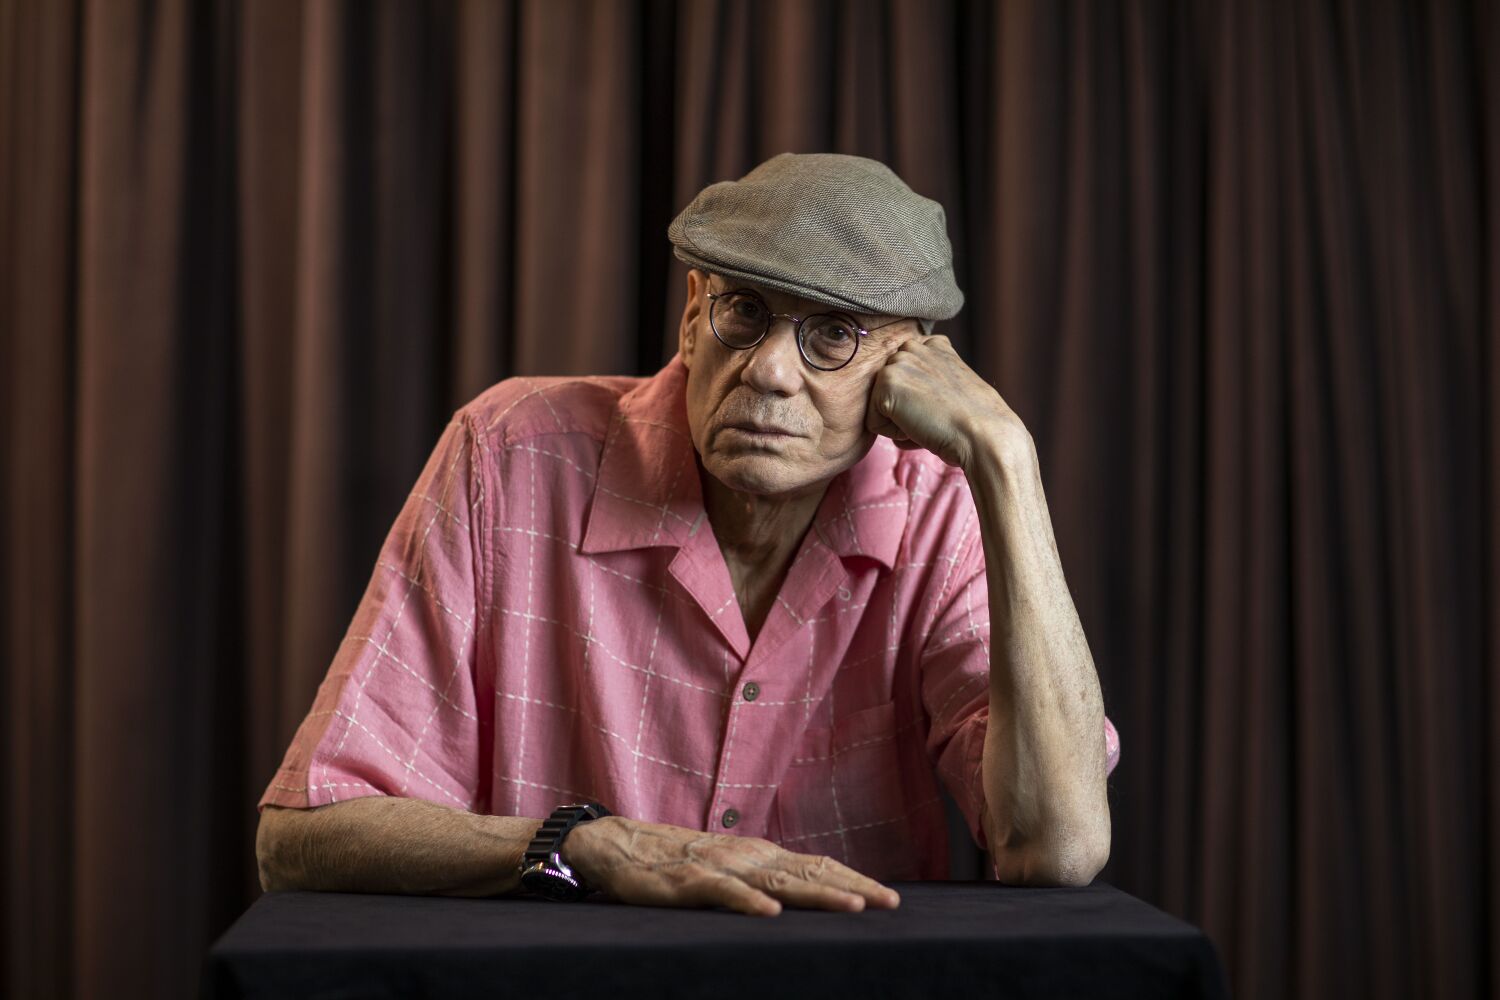 James Ellroy hates Raymond Chandler and dismisses Dostoevsky, but talks of his love for the LAPD